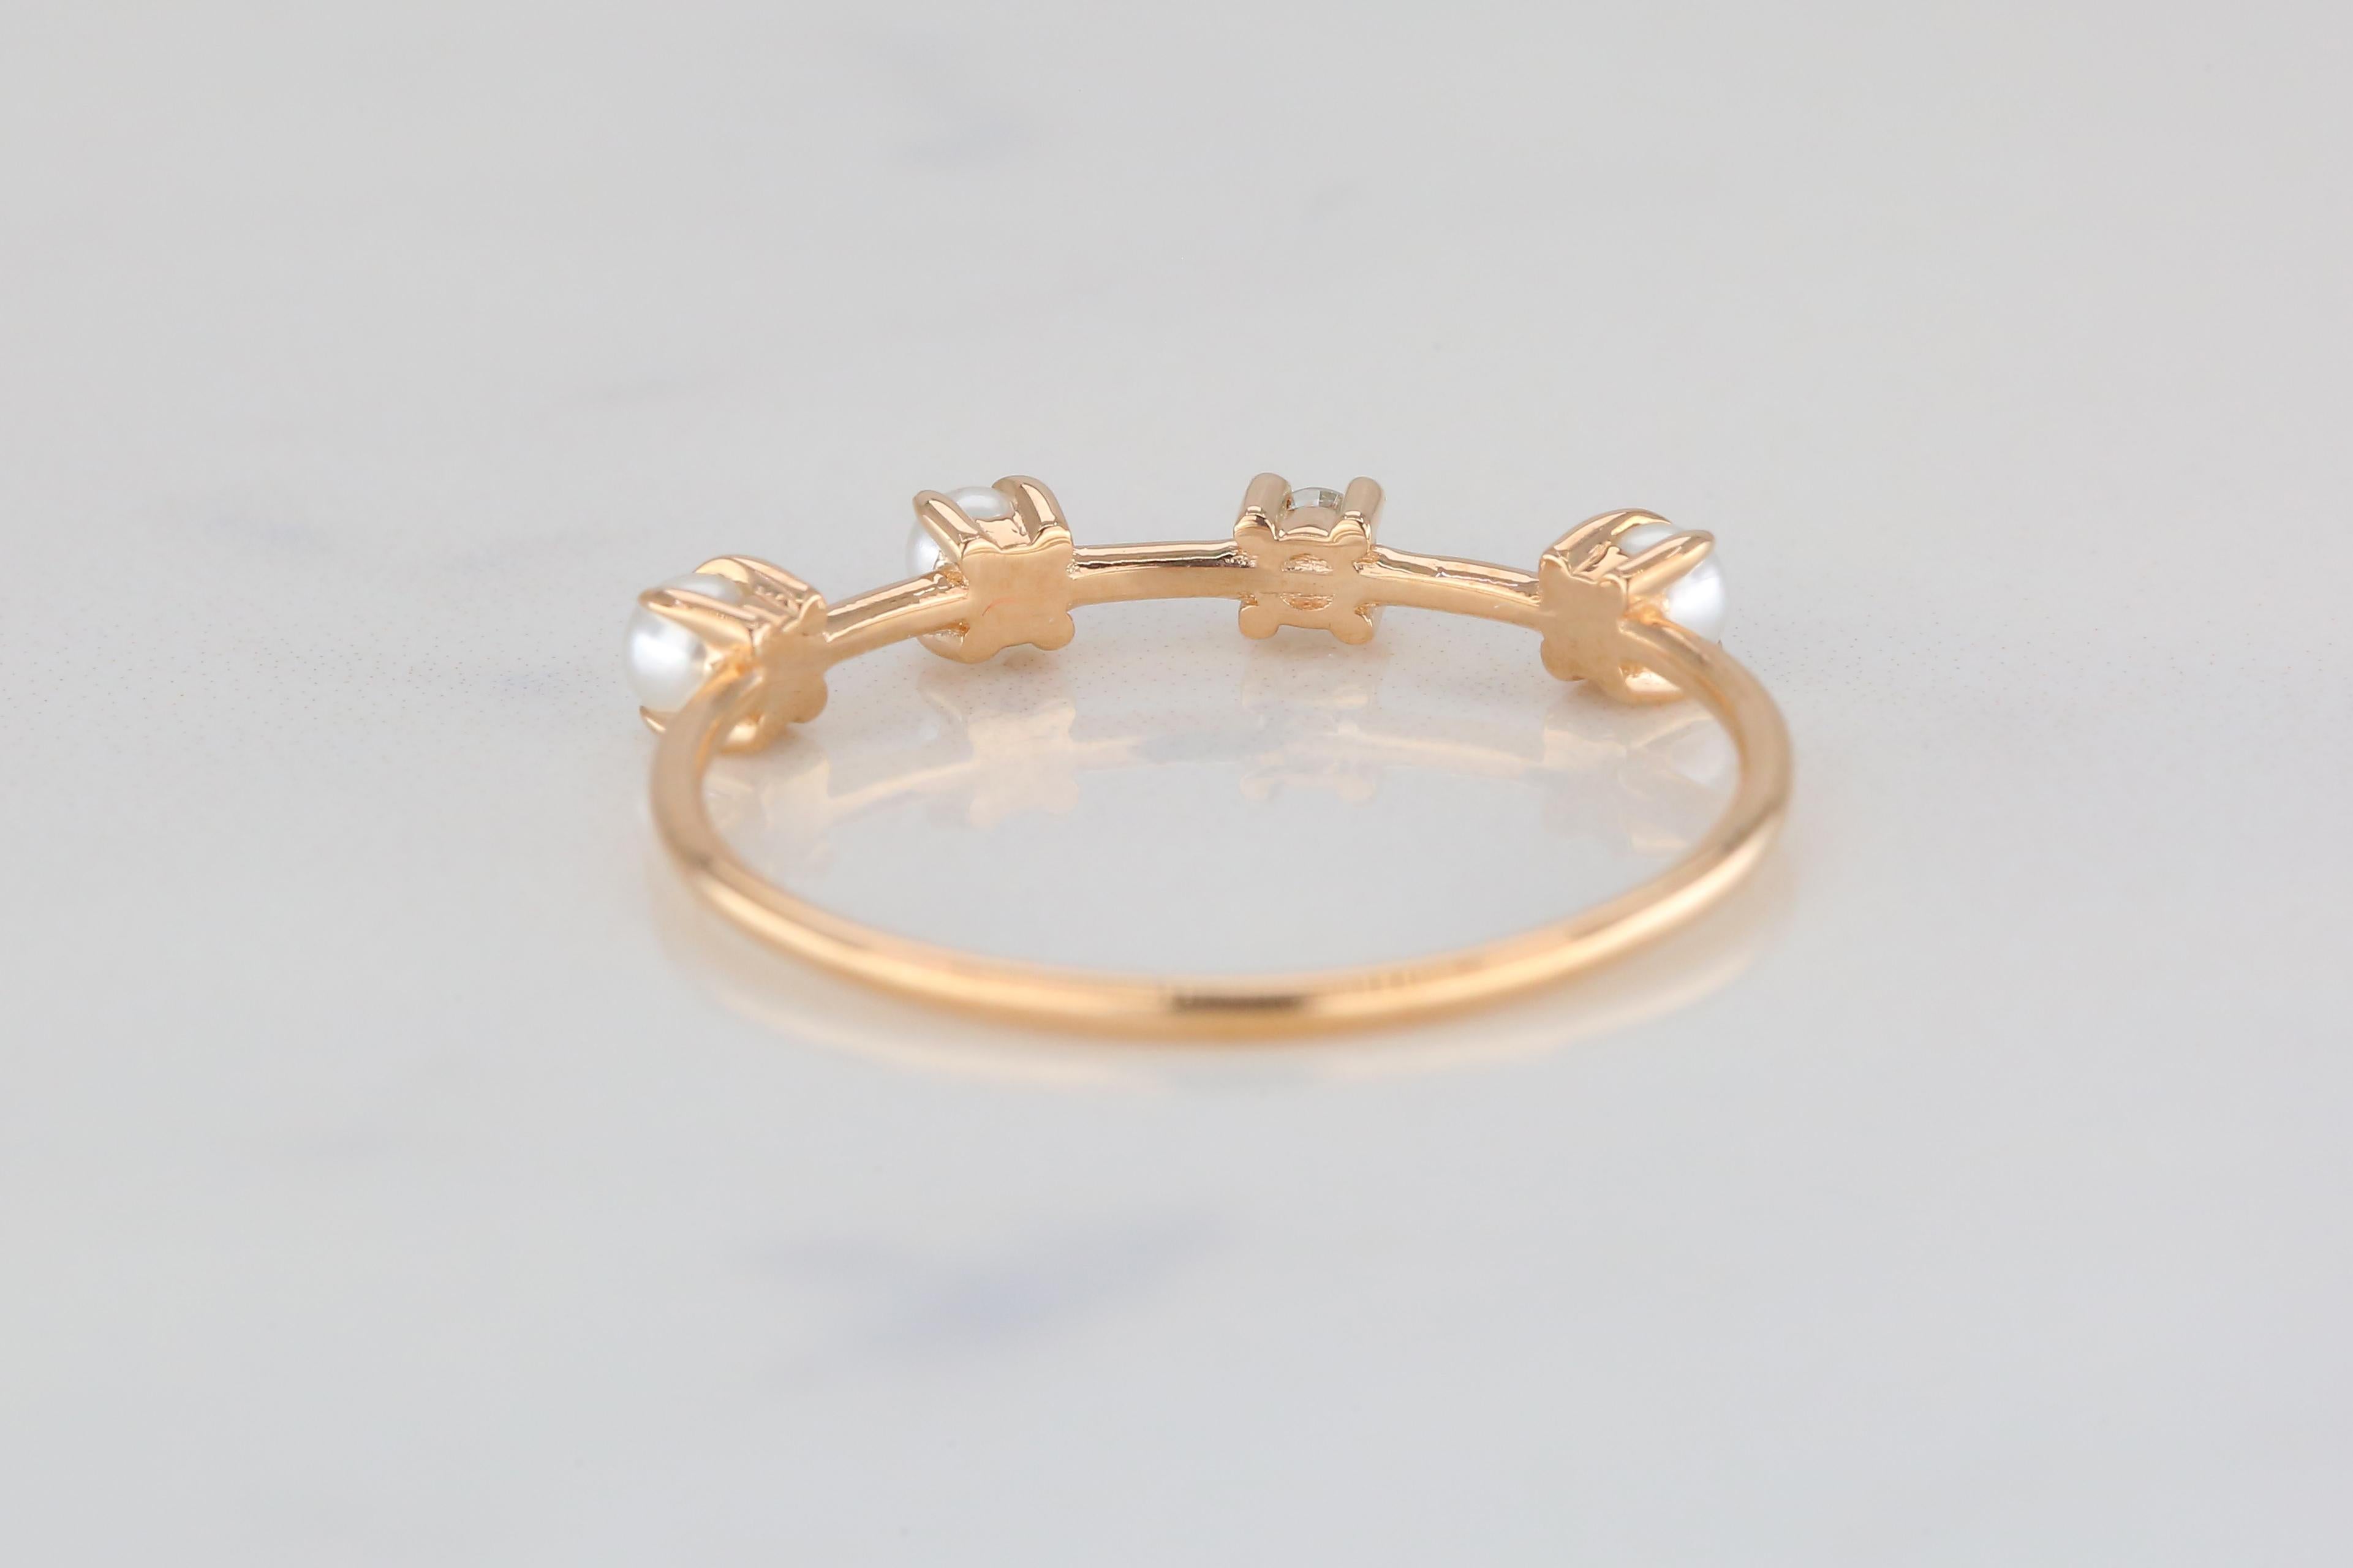 For Sale:  Three Pearl and Diamond Ring, 14K Gold Pearl Ring, Minimalist Style Ring 8